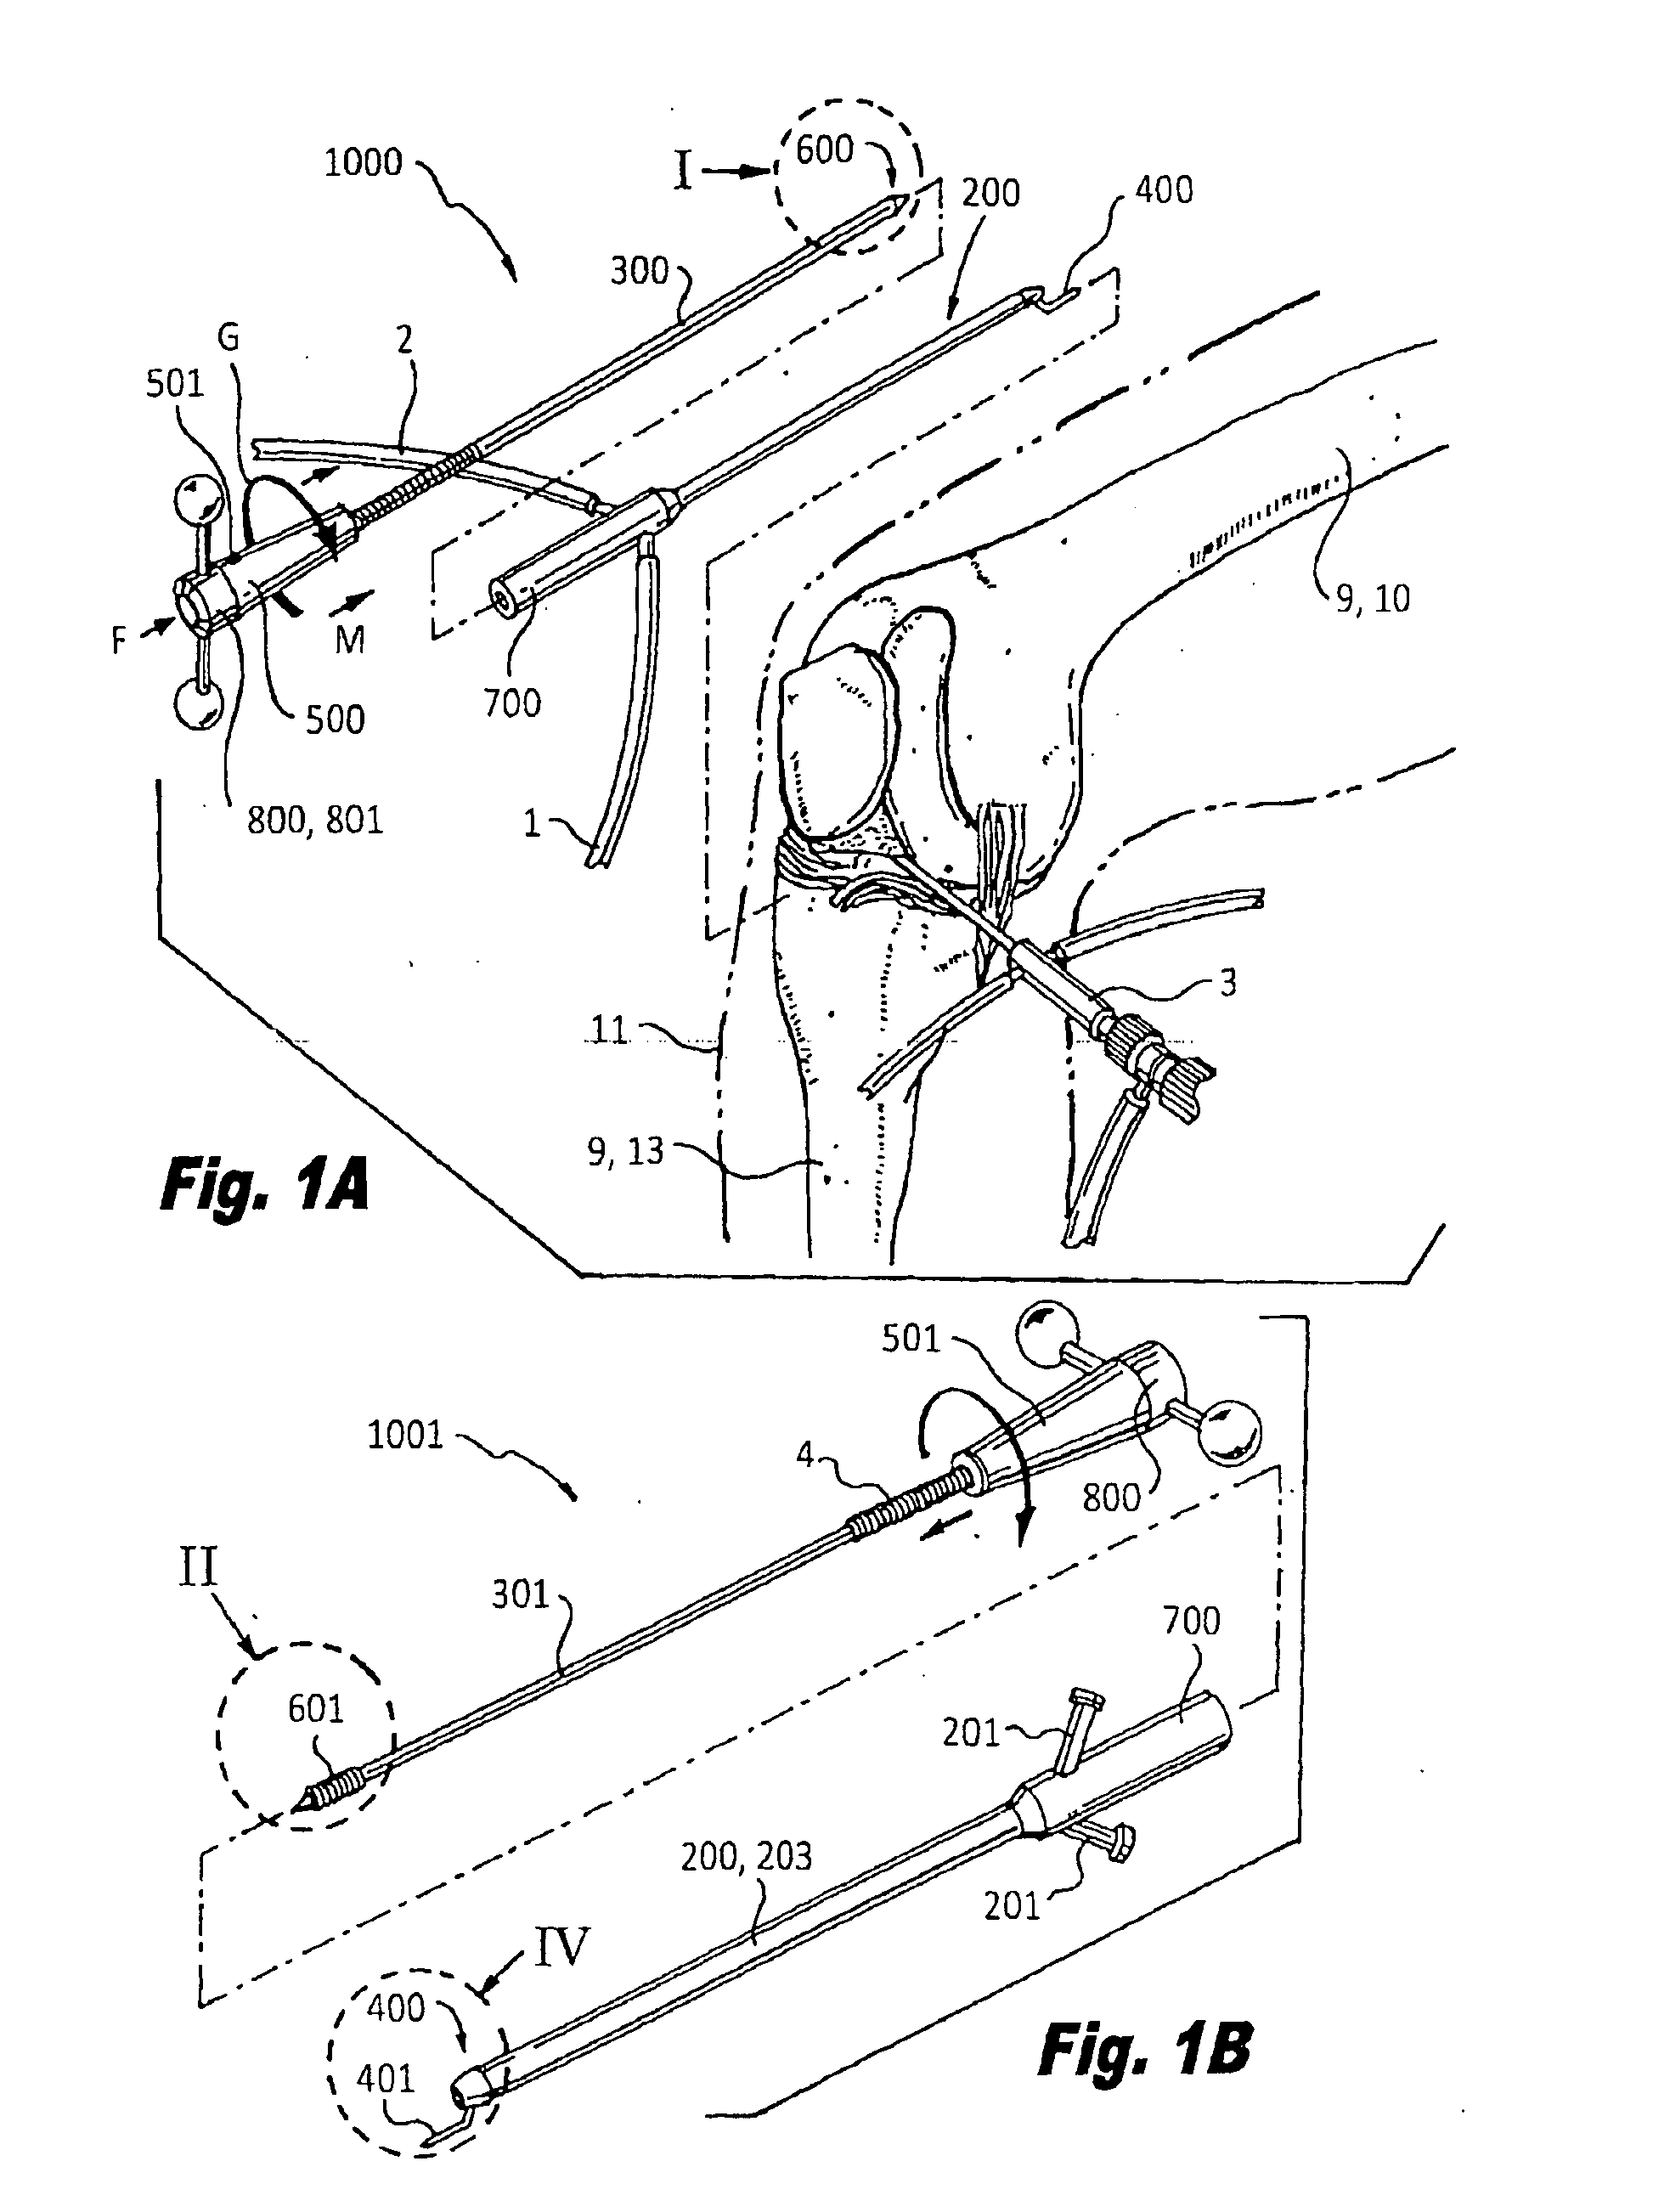 Cannulated apparatus and method relating to microfracture and revascularization methodologies